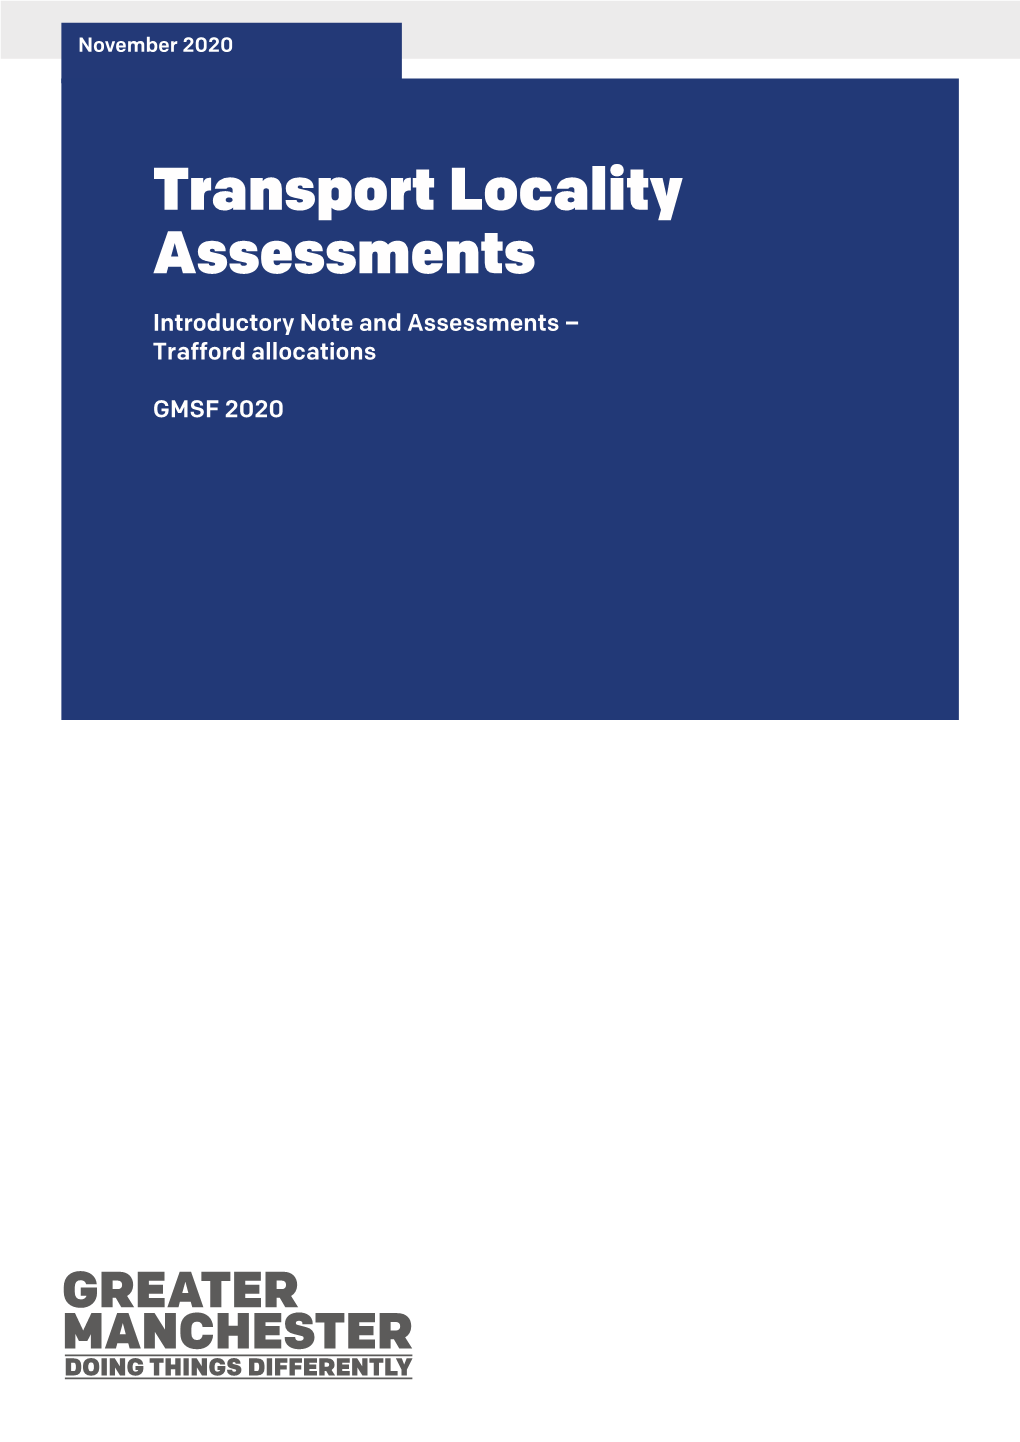 Trafford Locality Assessments GMSF 2020